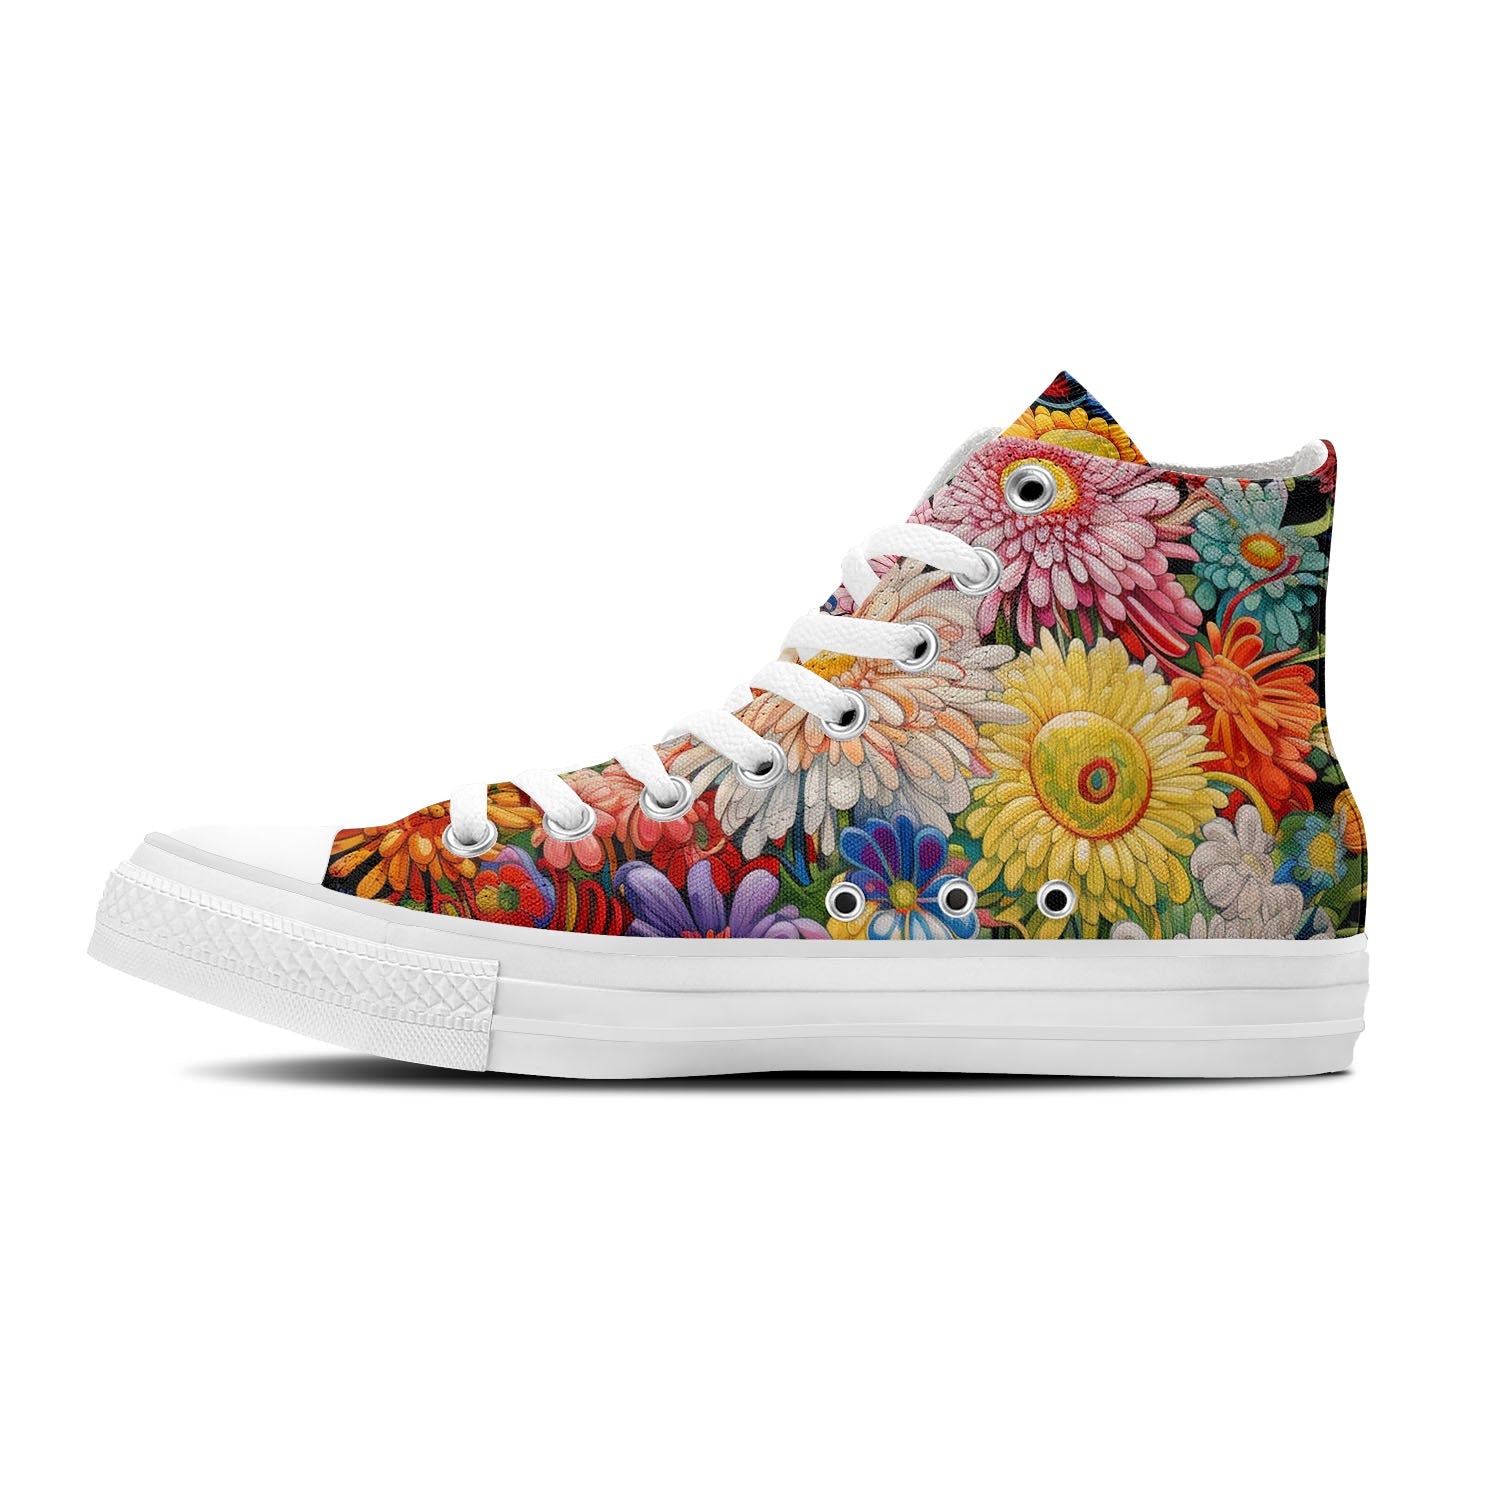 Blooms Elegance: Men and Women's Mid-Top Canvas Shoes - Elevate Your Style with Central-High Canvas Shoes Featuring the Playful Elegance of Artistic Chrysanthemum Designs